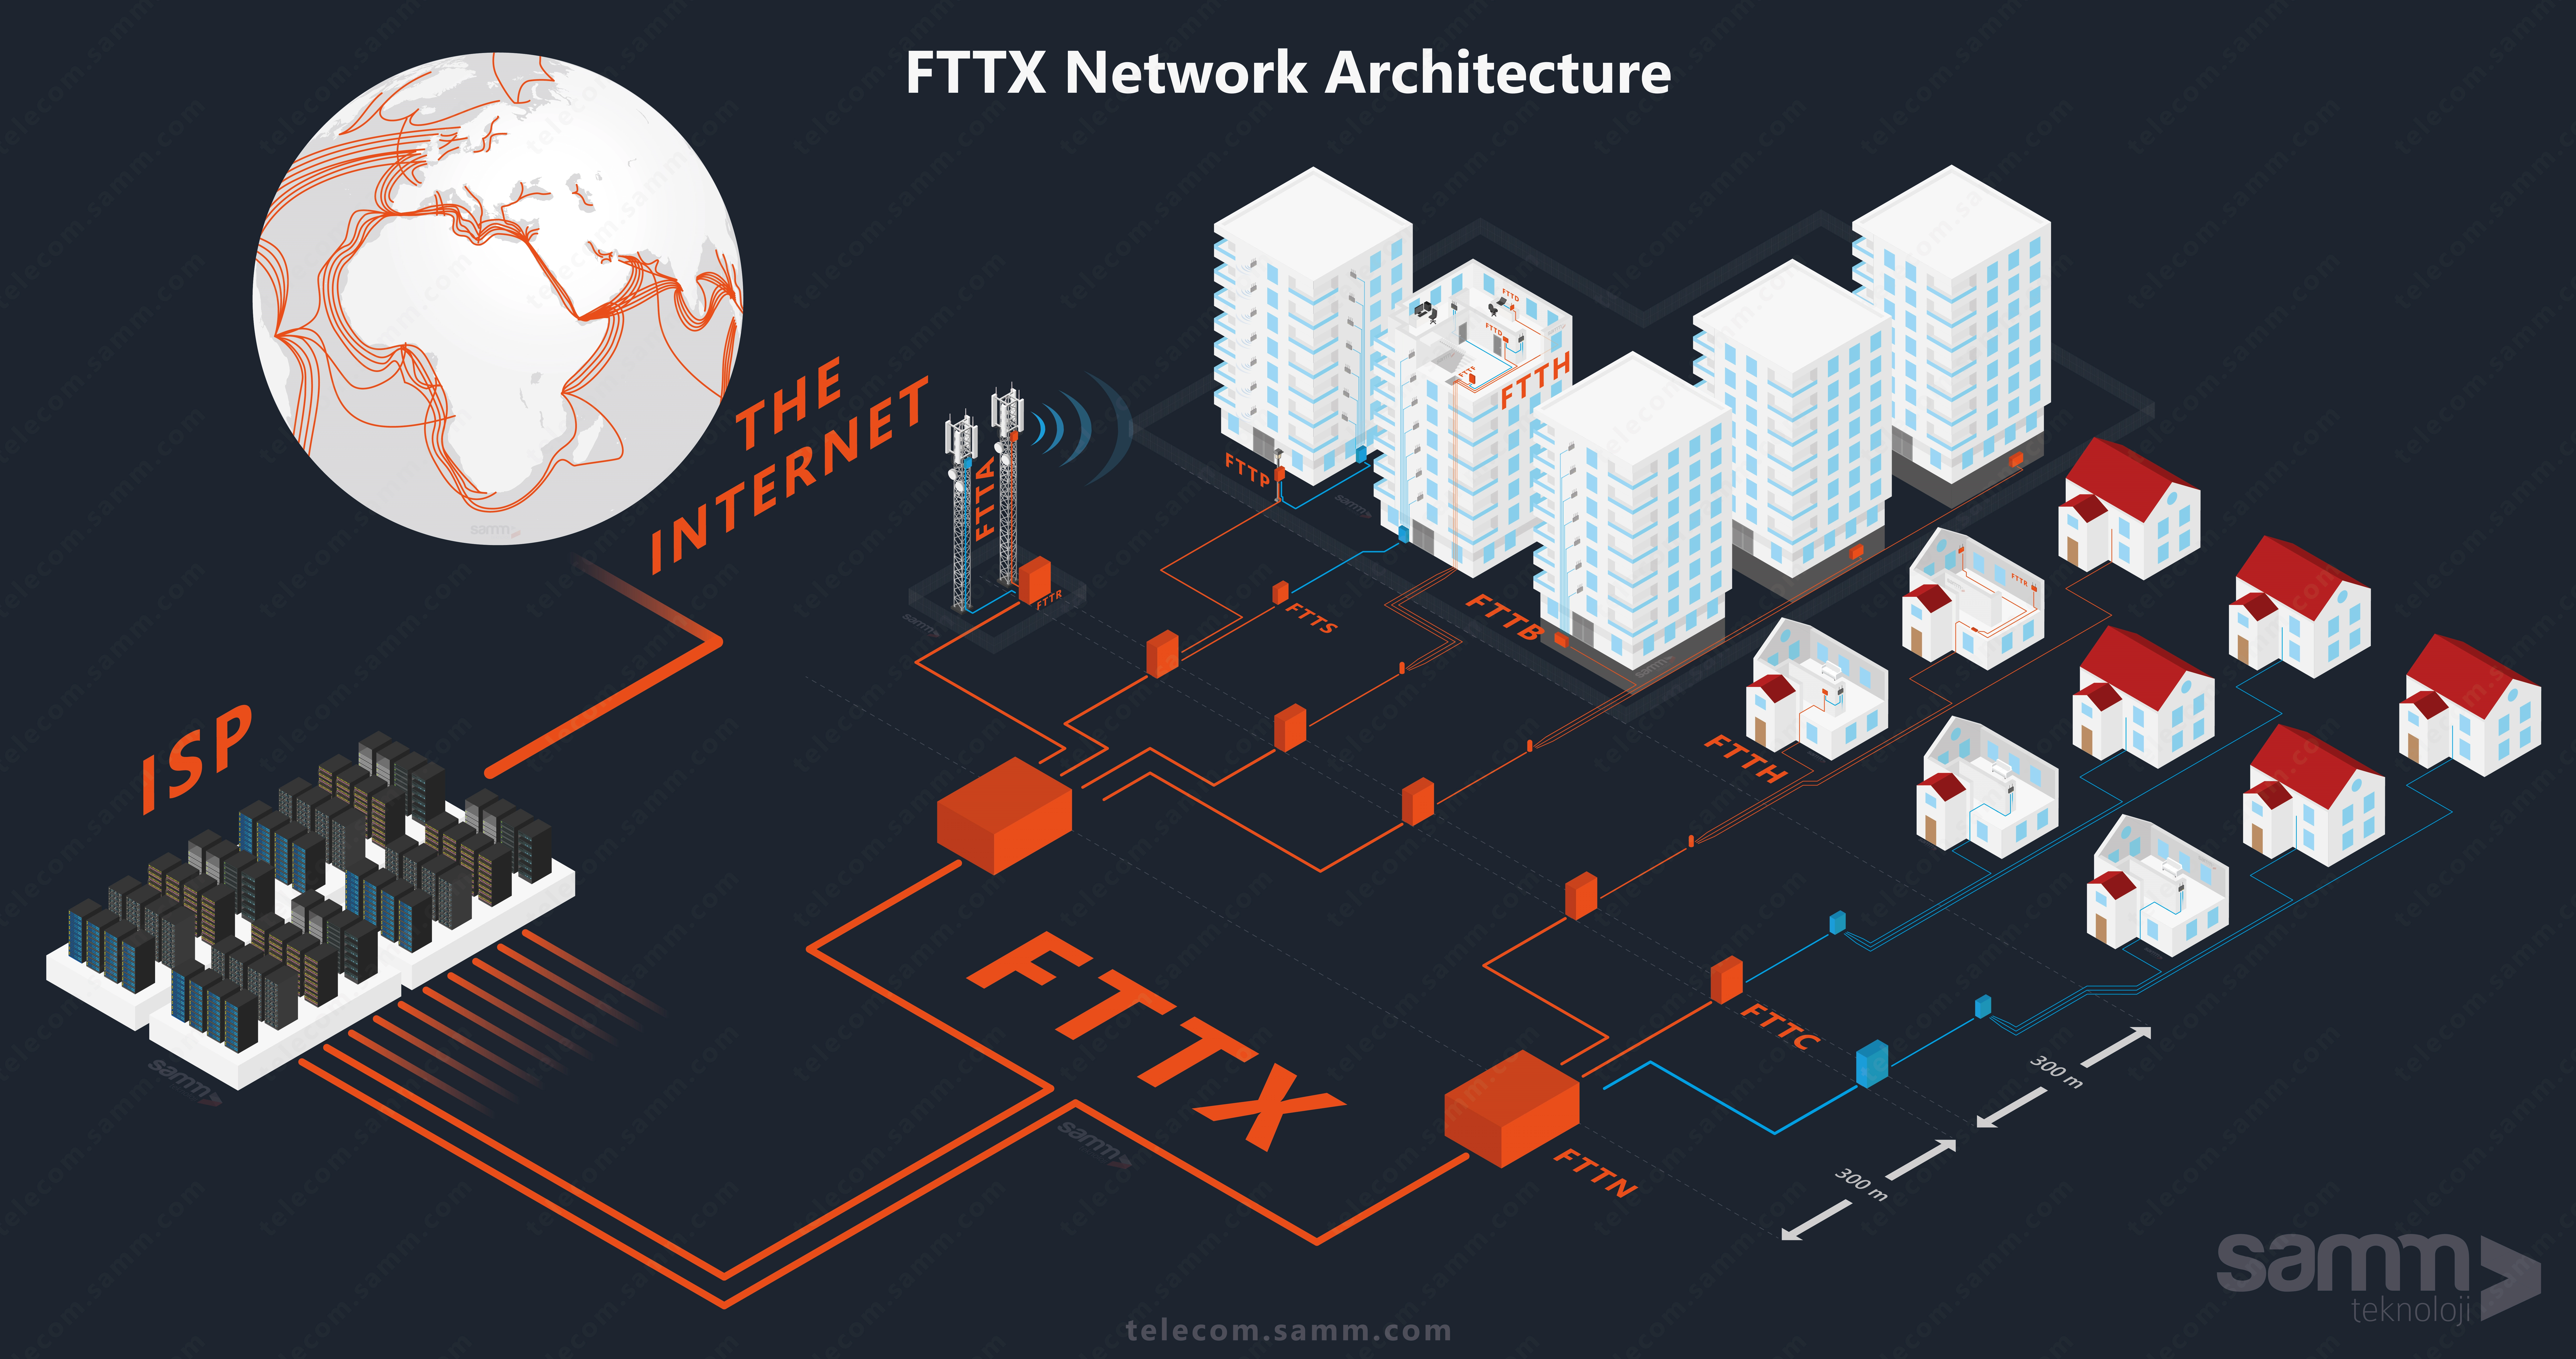 What Does FTTH and FTTX Mean, and What is the Internet? FTTX includes all the other similar terms like FTTN, FTTC/FTTK, FTTB, FTTH, FTTP, FTTS, FTTD, FTTR, FTTS, and FTTA.